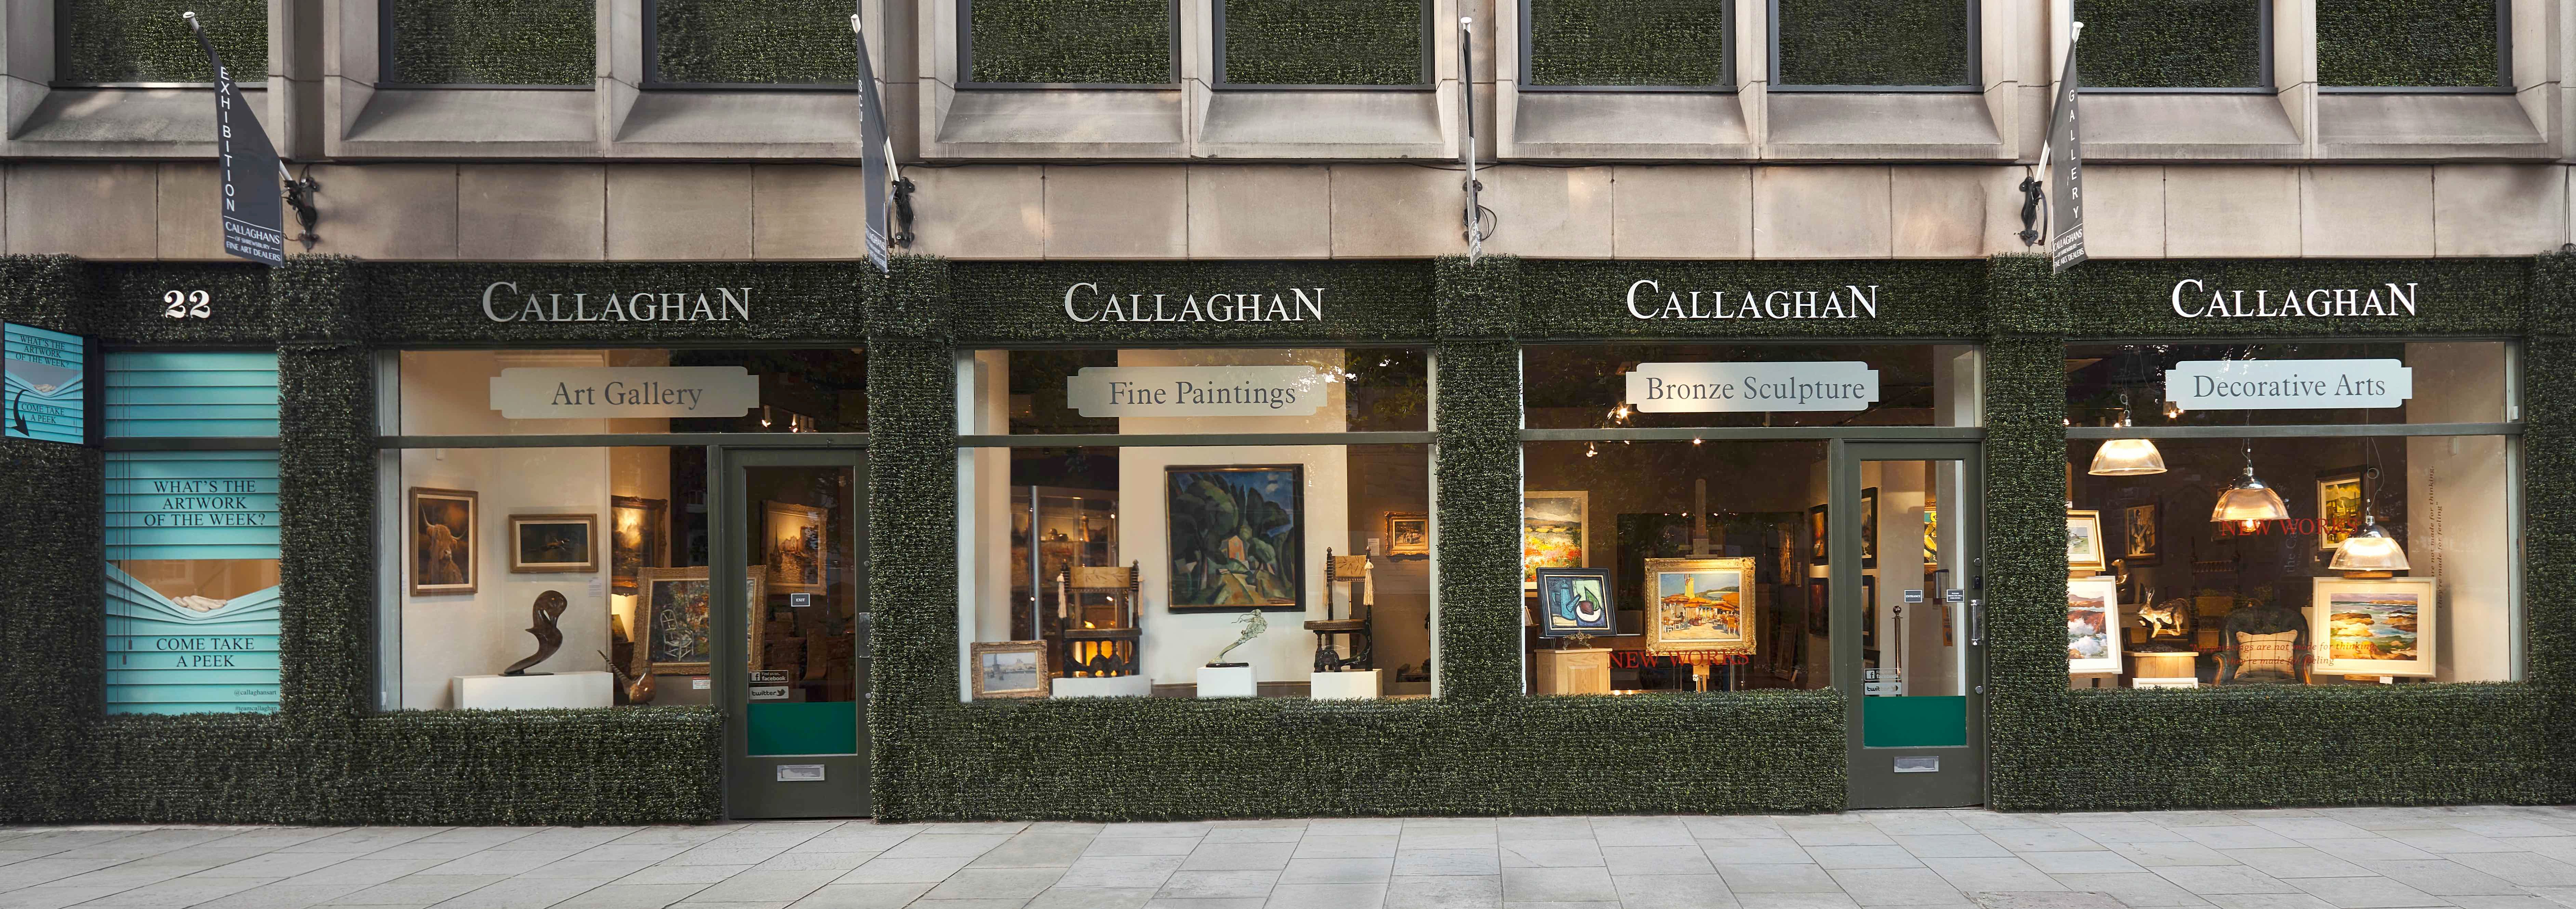 Welcome to Callaghans of Shrewsbury!